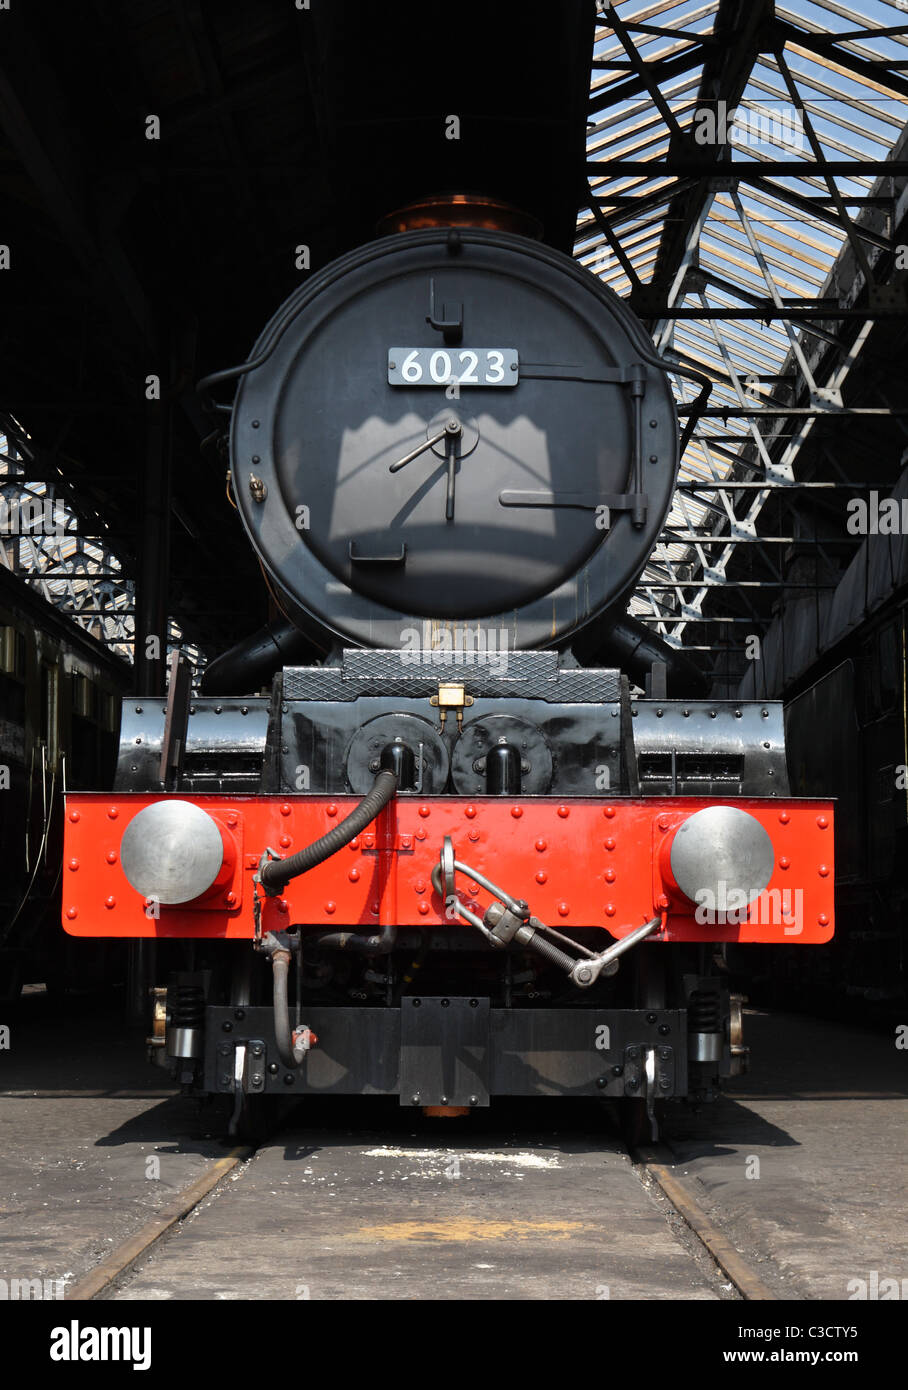 Front view of former GWR steam locomotive 6023 King Edward 11, seen at Didcot Railway Centre loco shed. Stock Photo